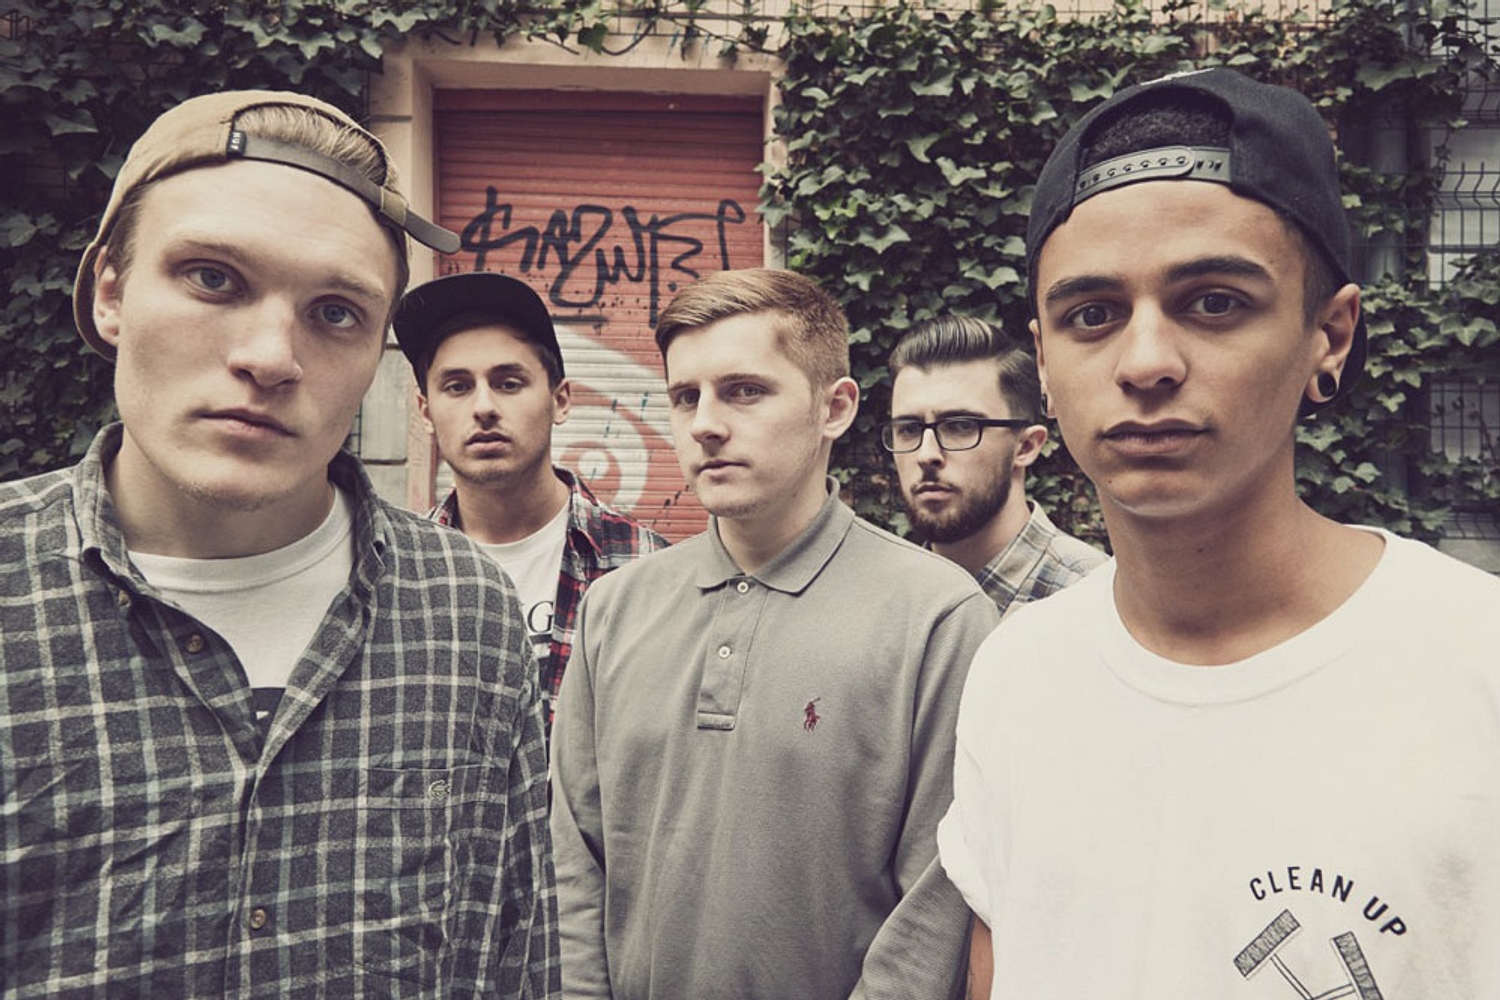 Neck Deep: “If Leeds was anything go by, this should be awesome”